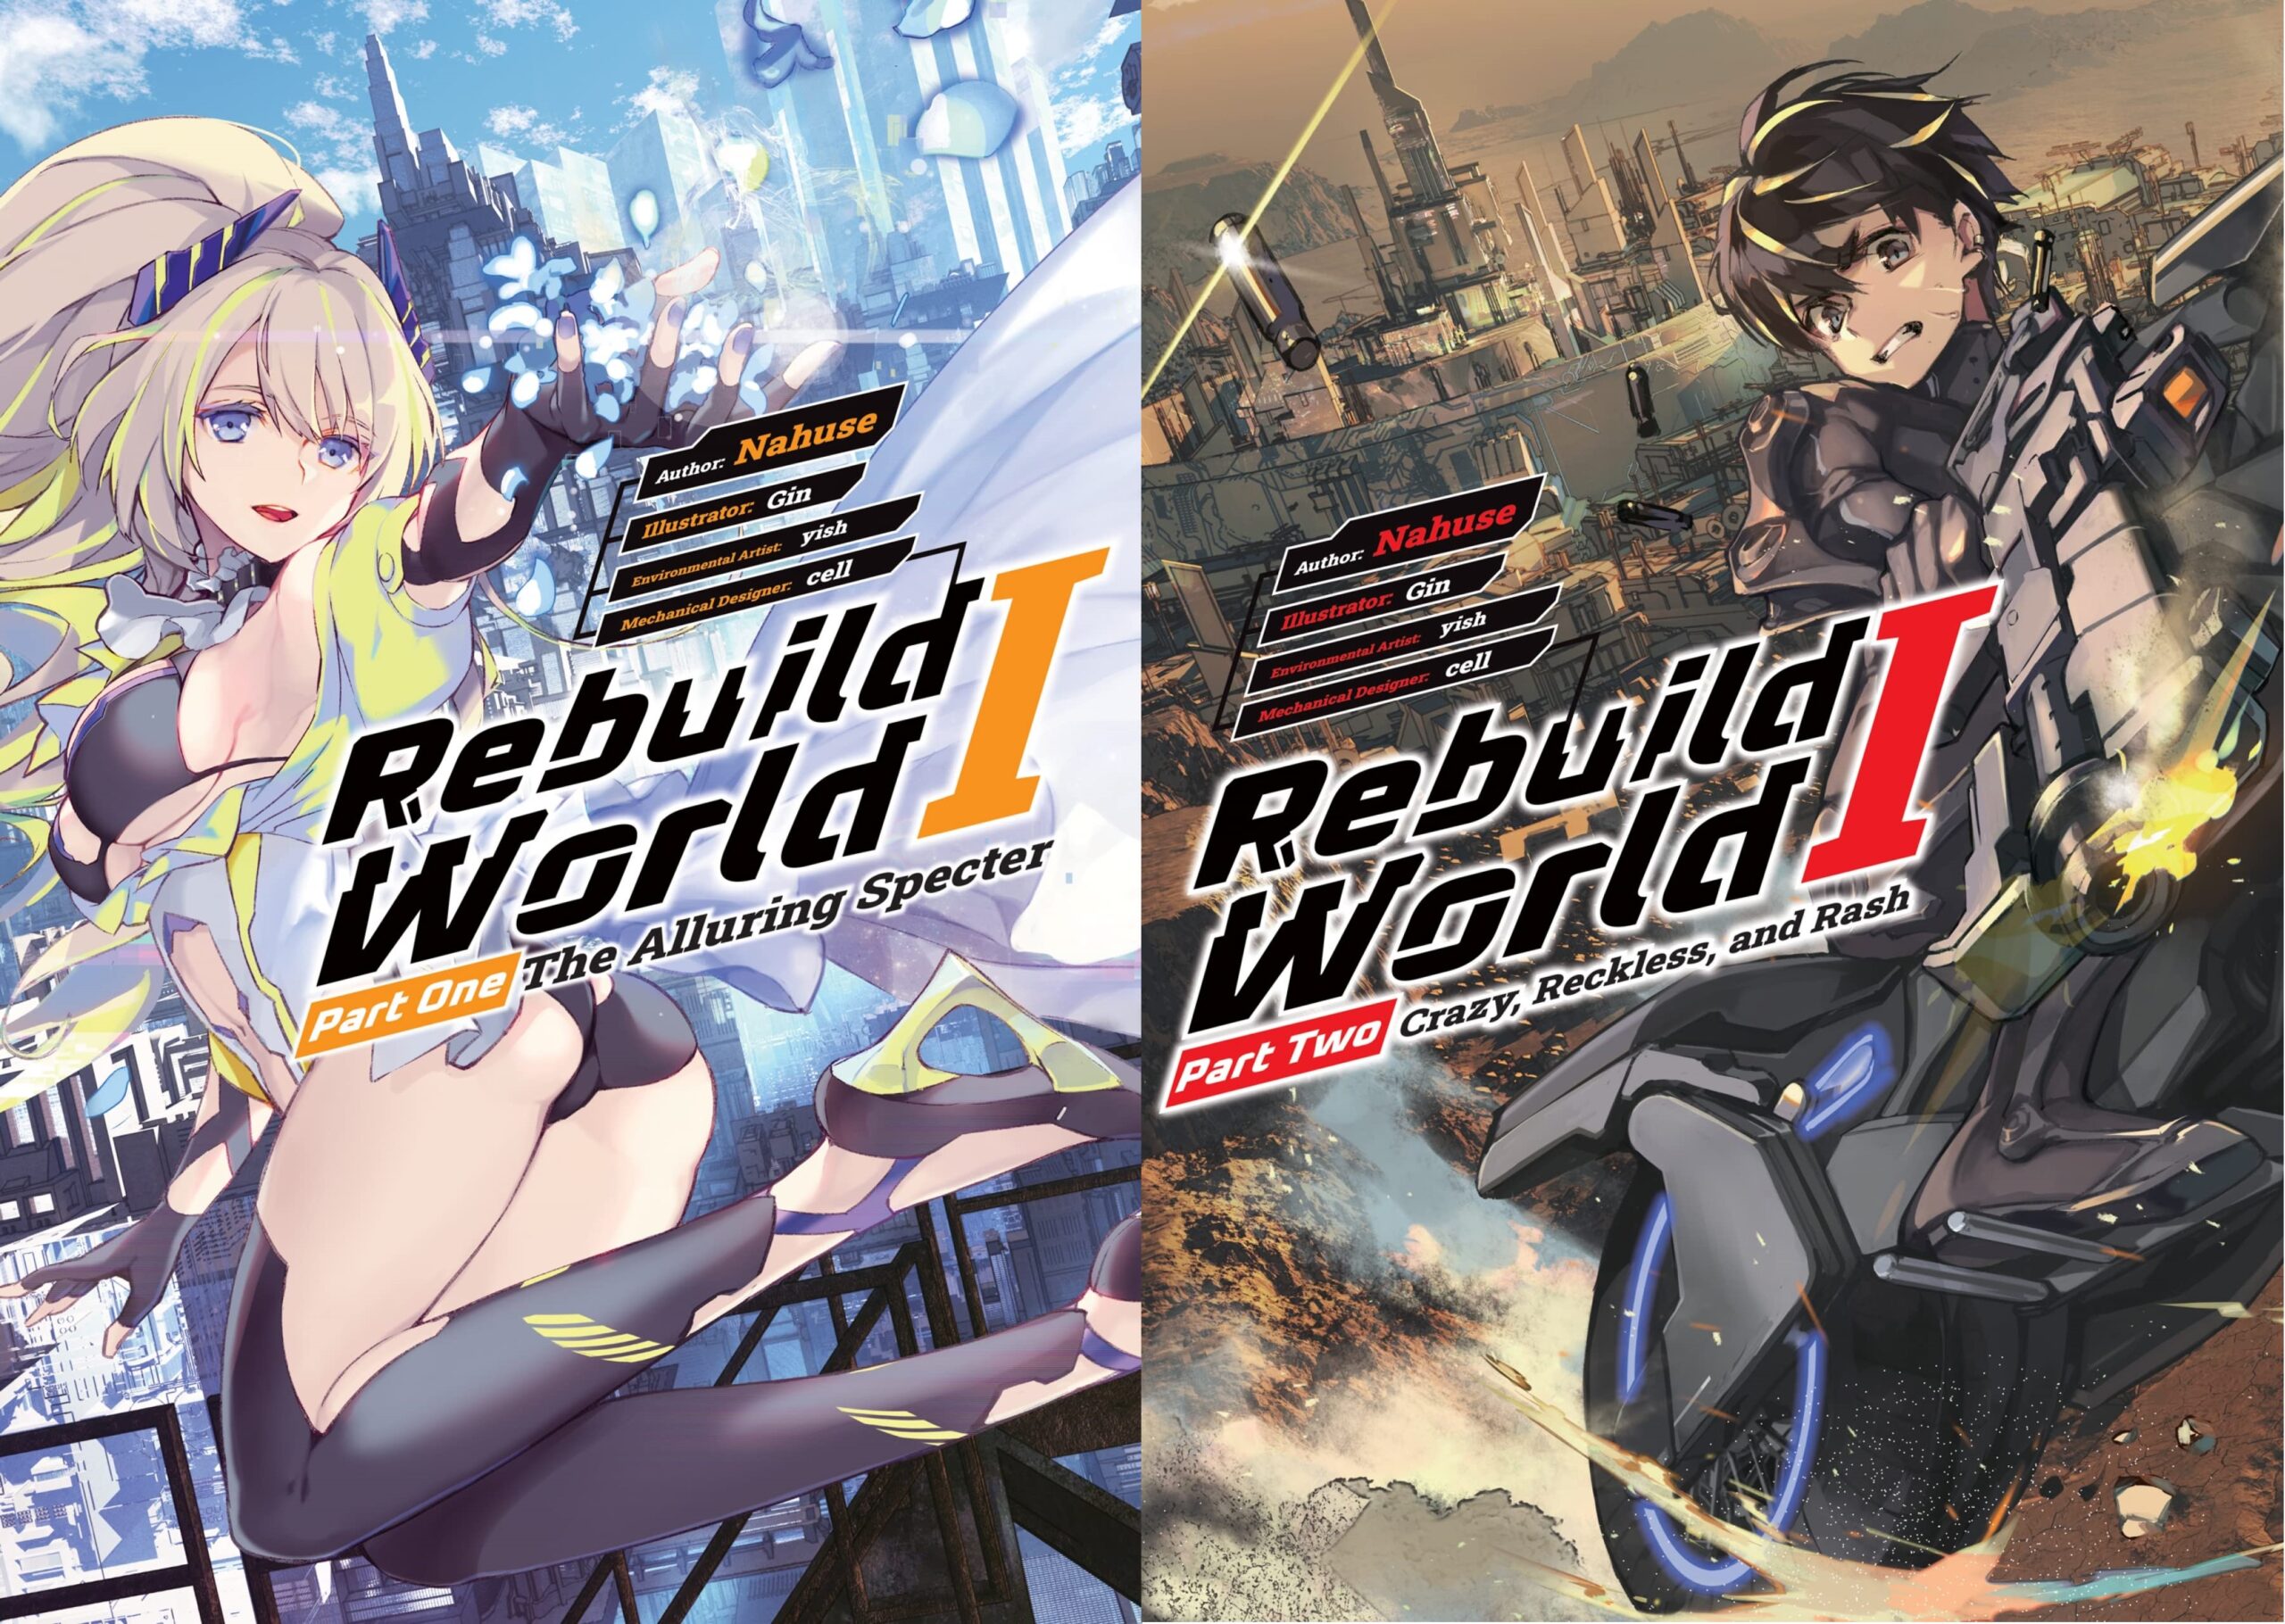 Rebuild World I: Part One: The Alluring Specter and Part Two: Crazy, Reckless, and Rash Review